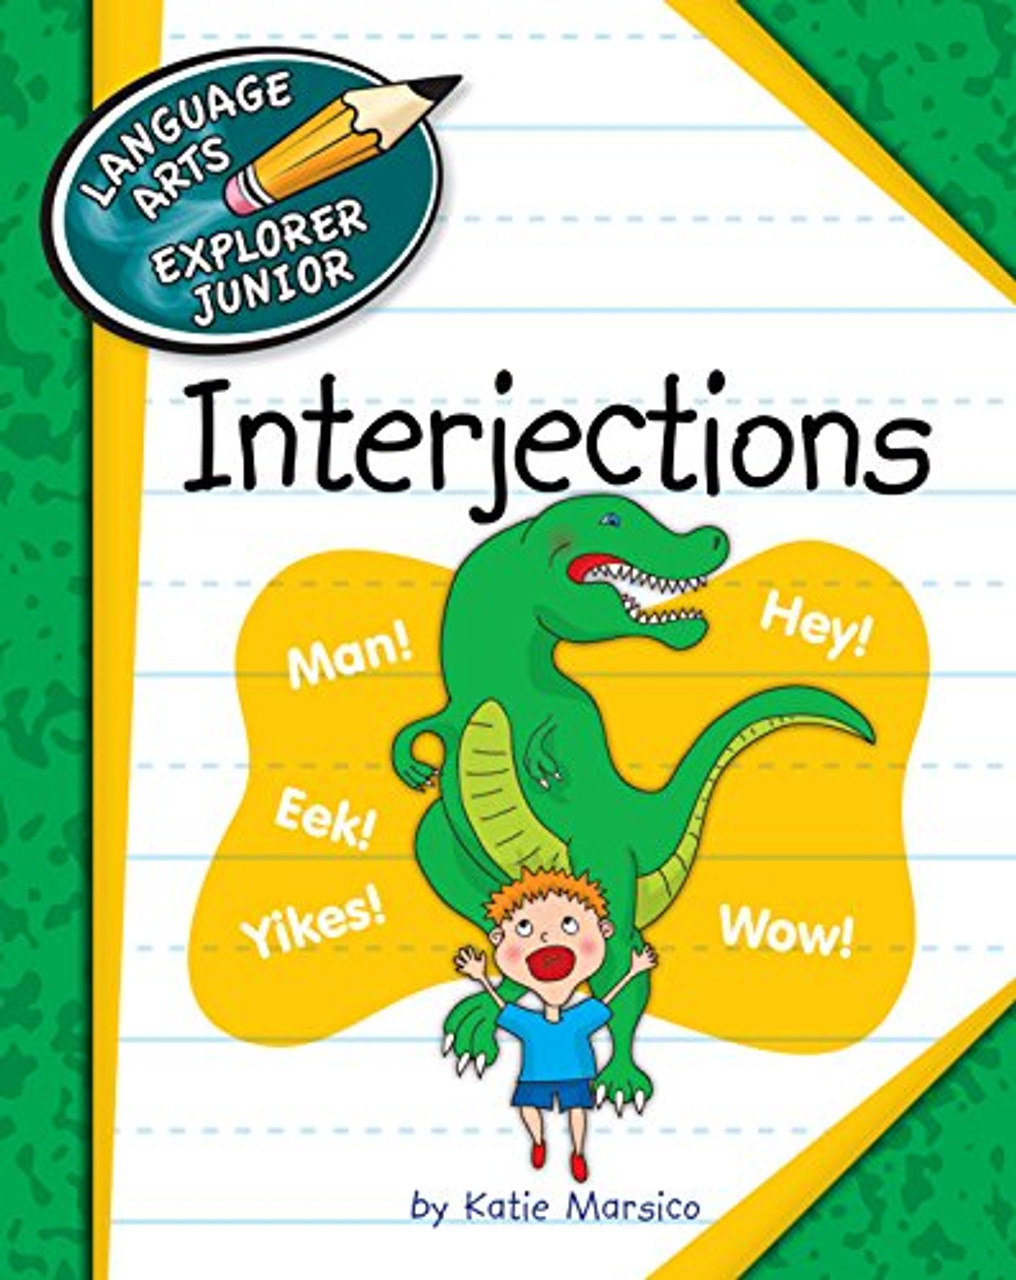 Interjections by Katie Marsico